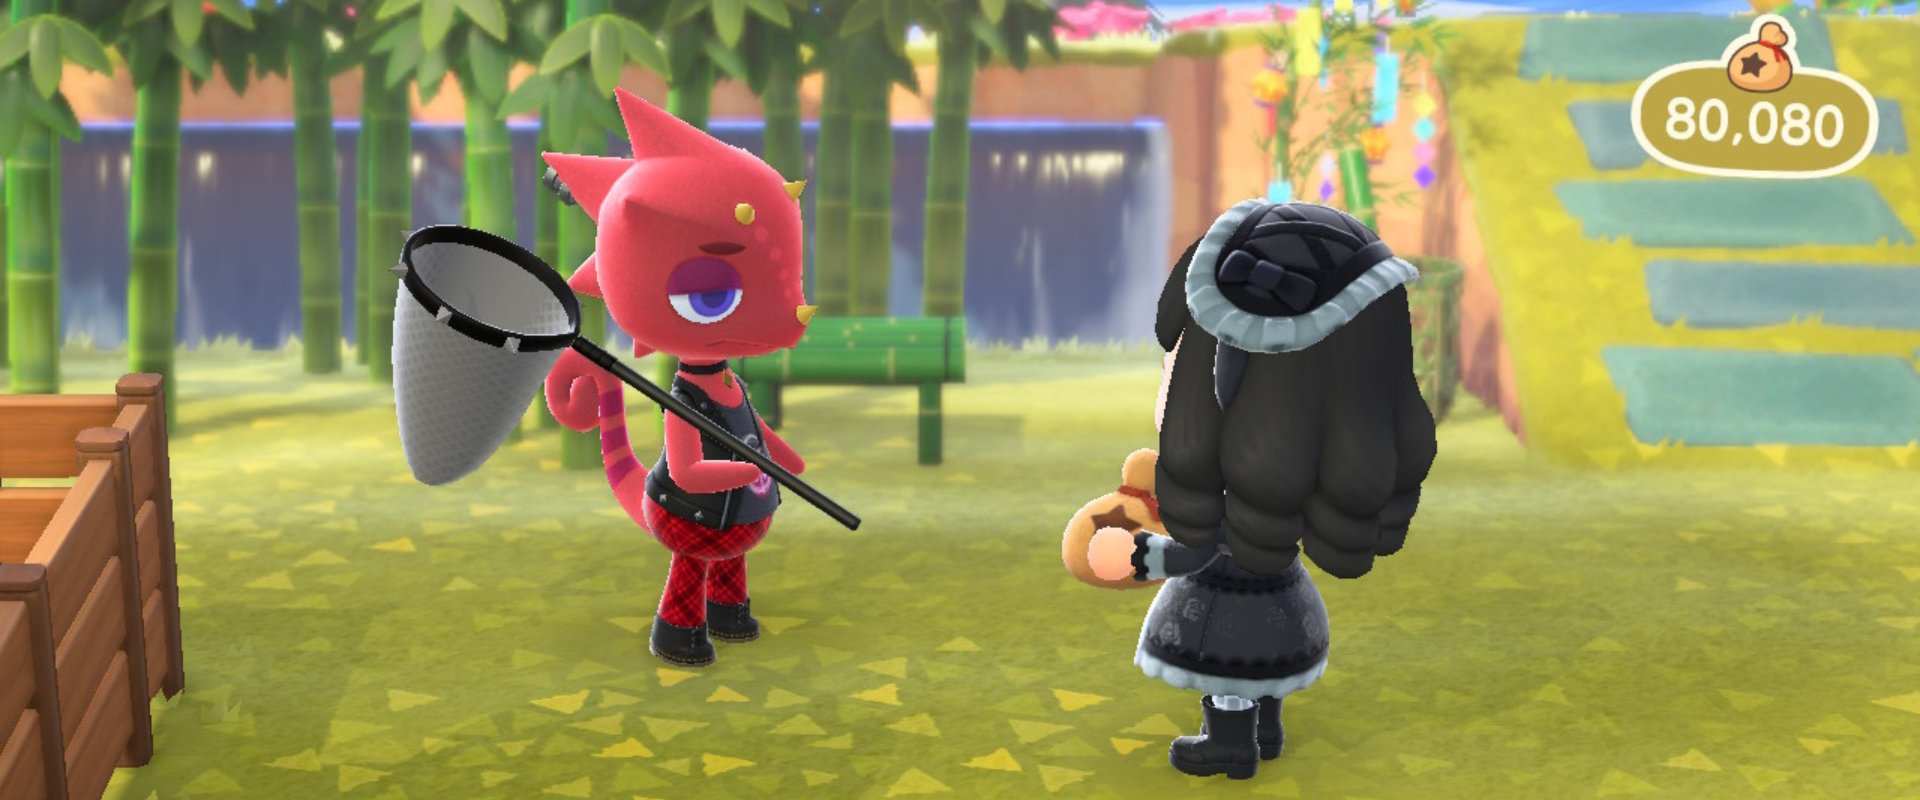 Ultimate Selling Guide for Bugs in Animal Crossing New Horizons